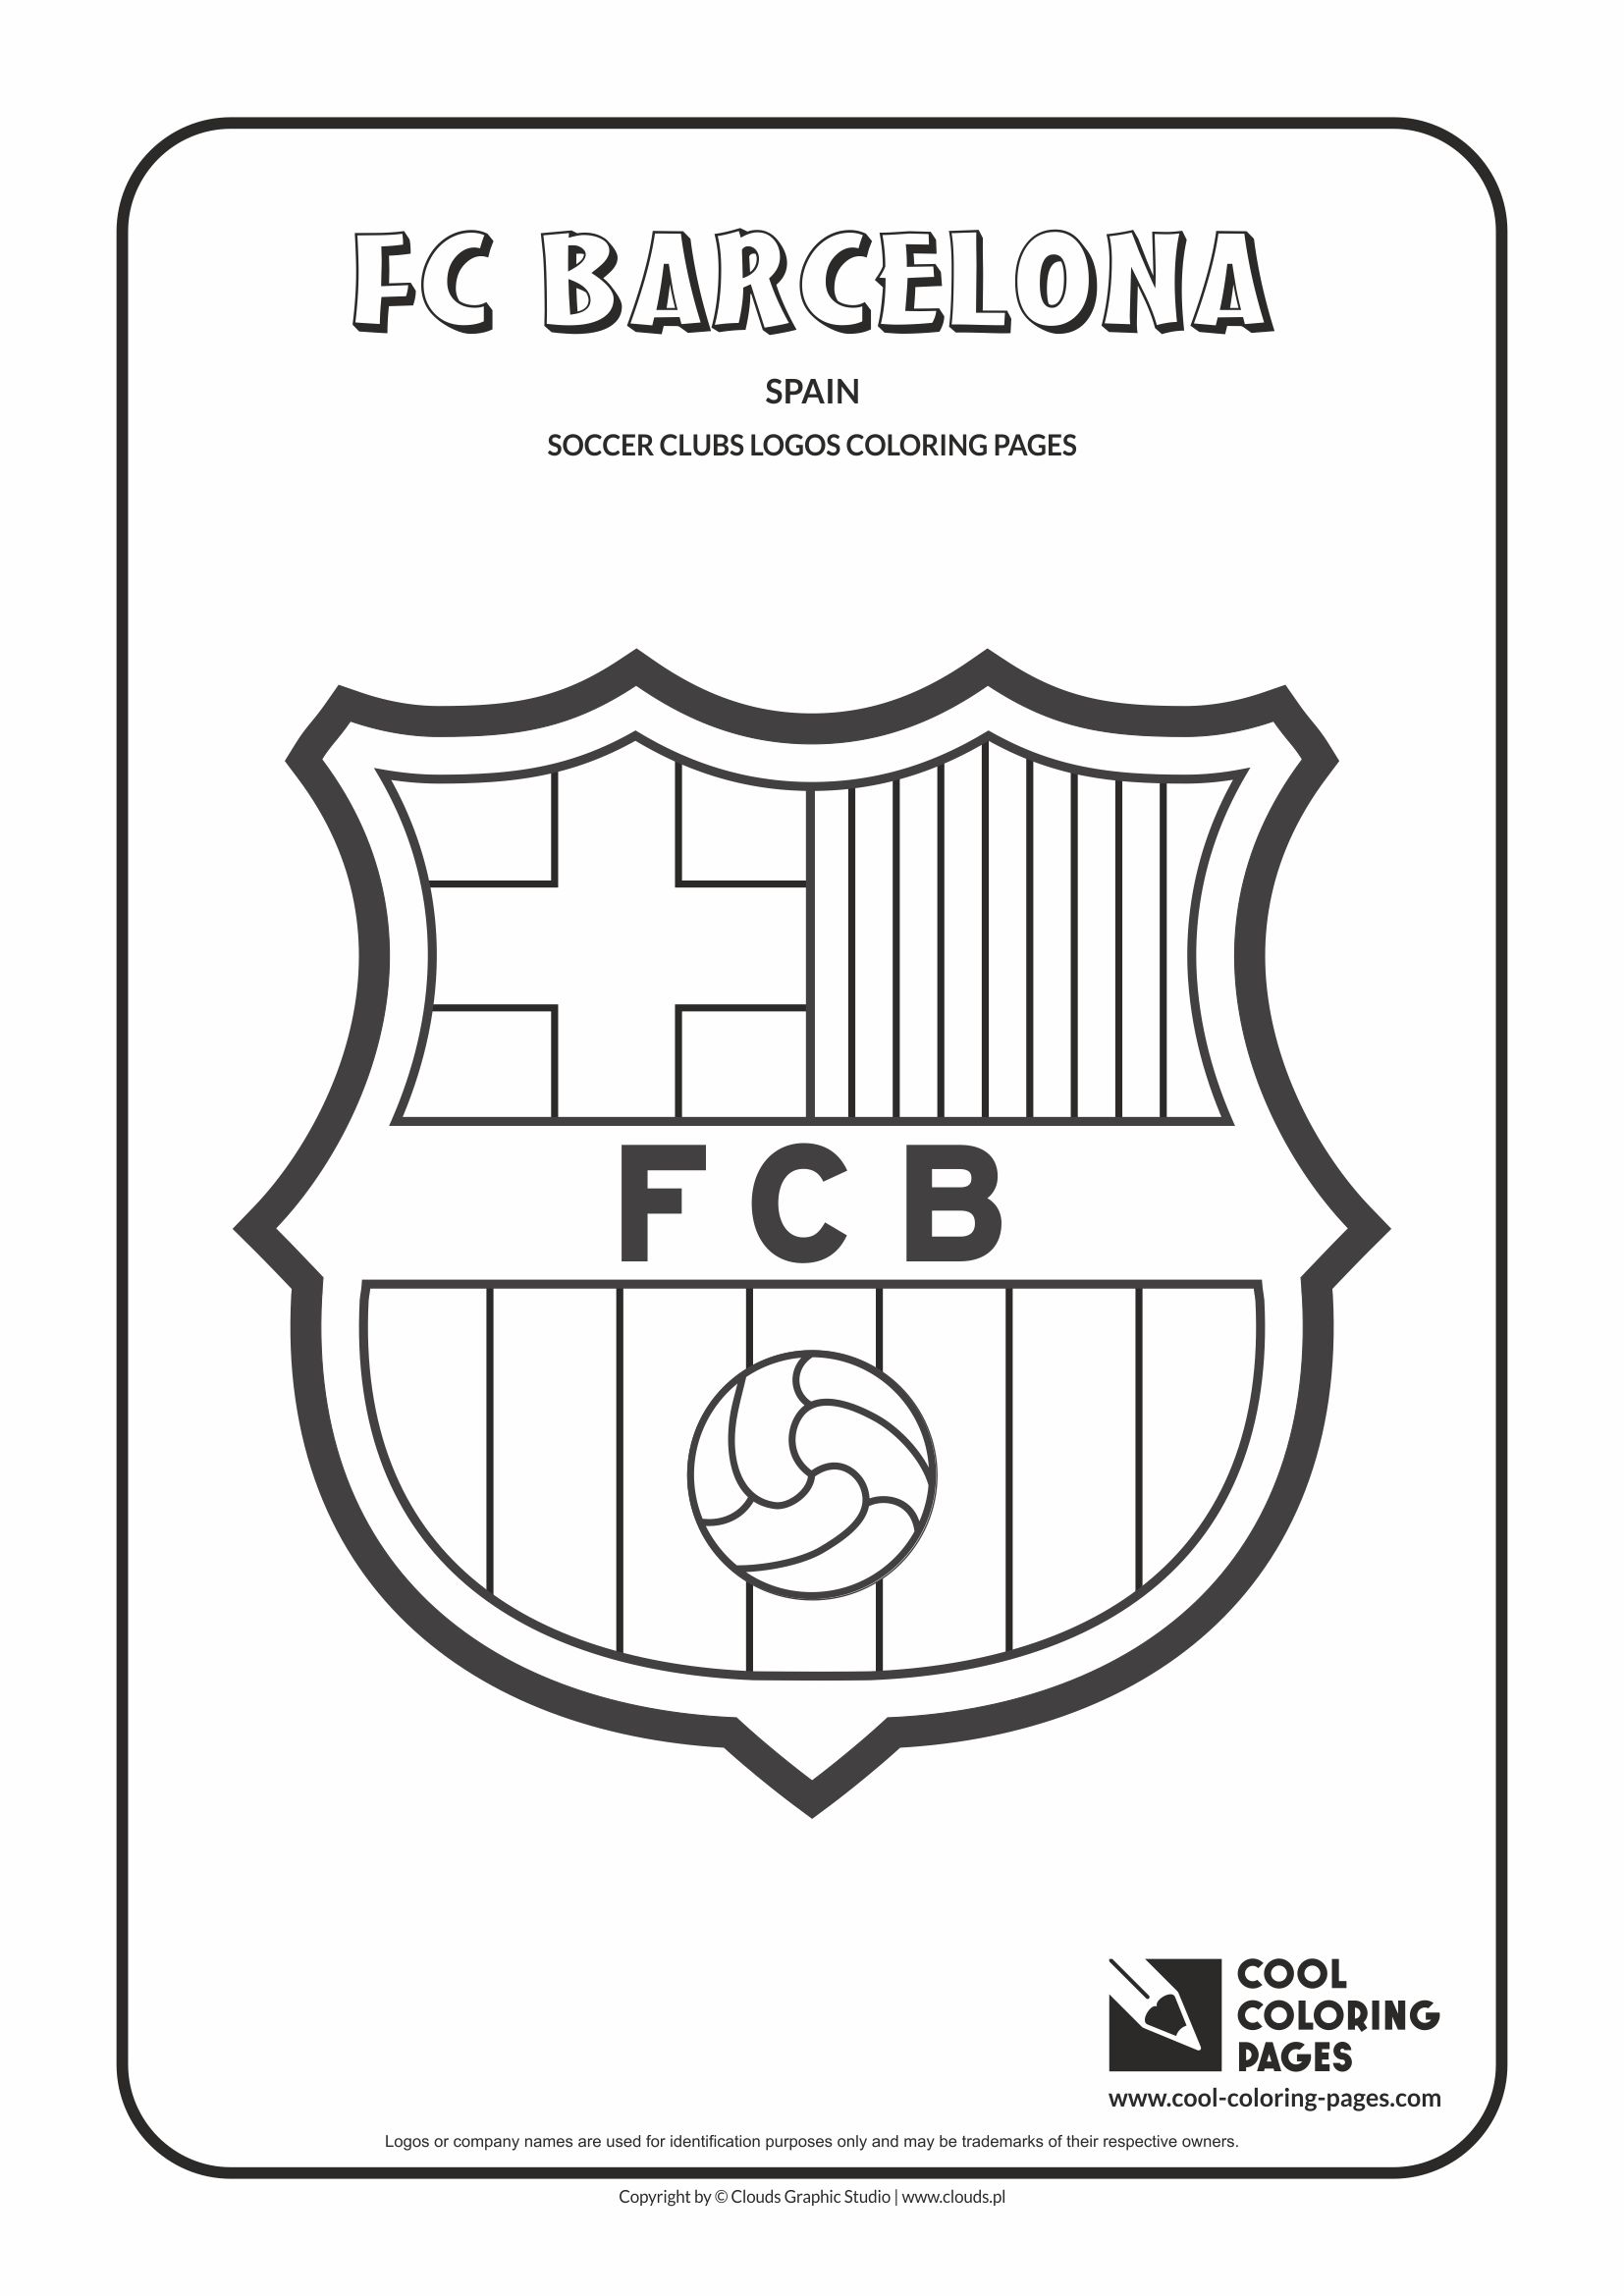 Cool Coloring Pages Soccer clubs logos Cool Coloring